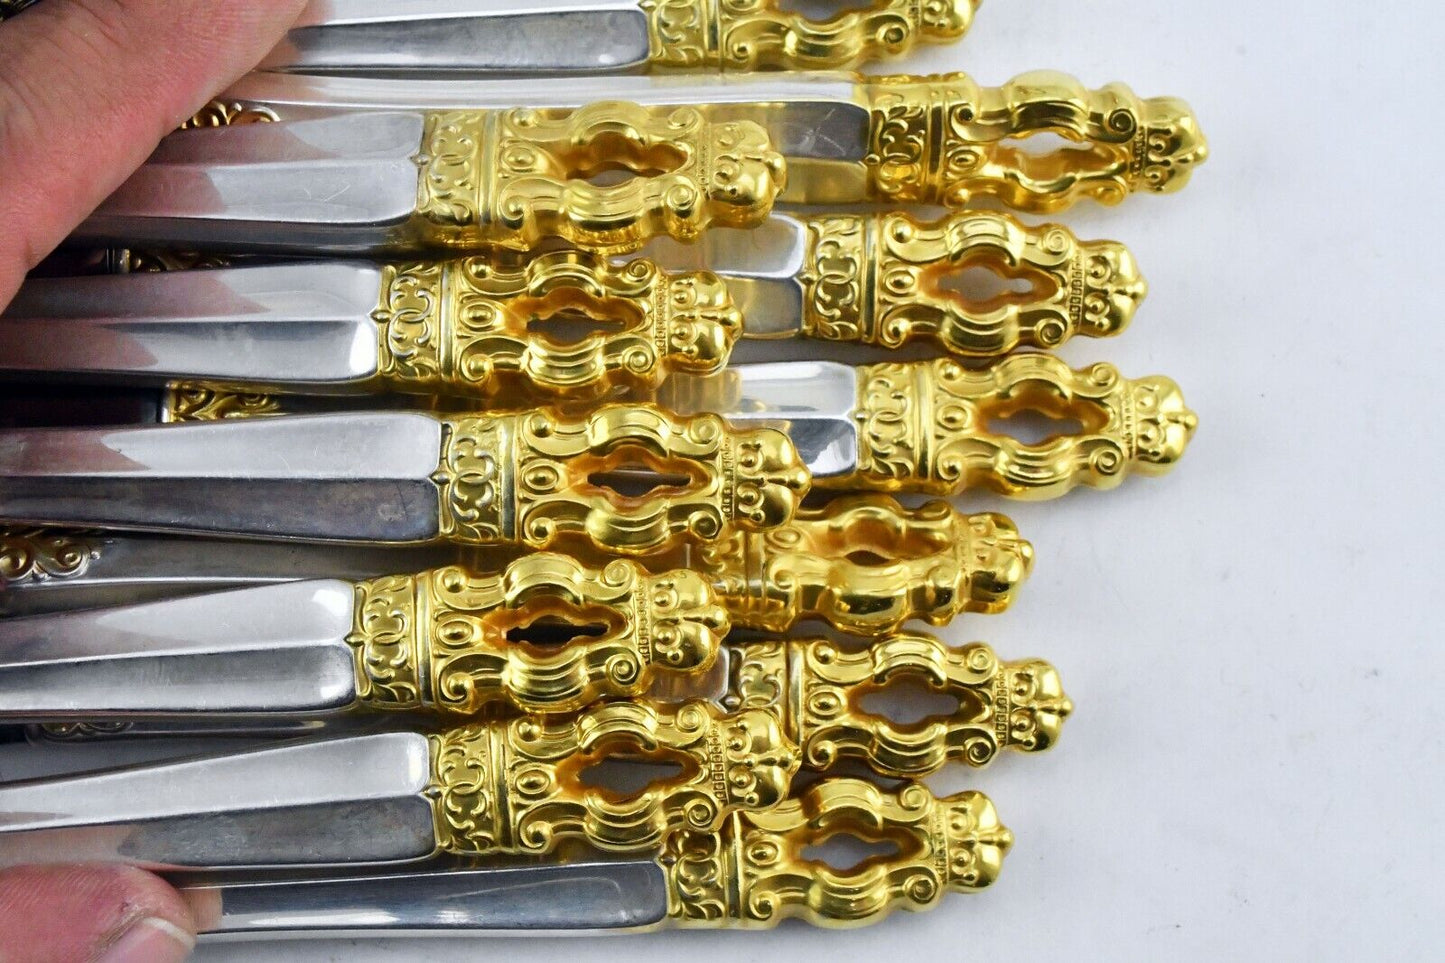 12pc. Hispana-Sovereign "Gold" by Gorham Sterling Hollow Handle Butter Spreaders